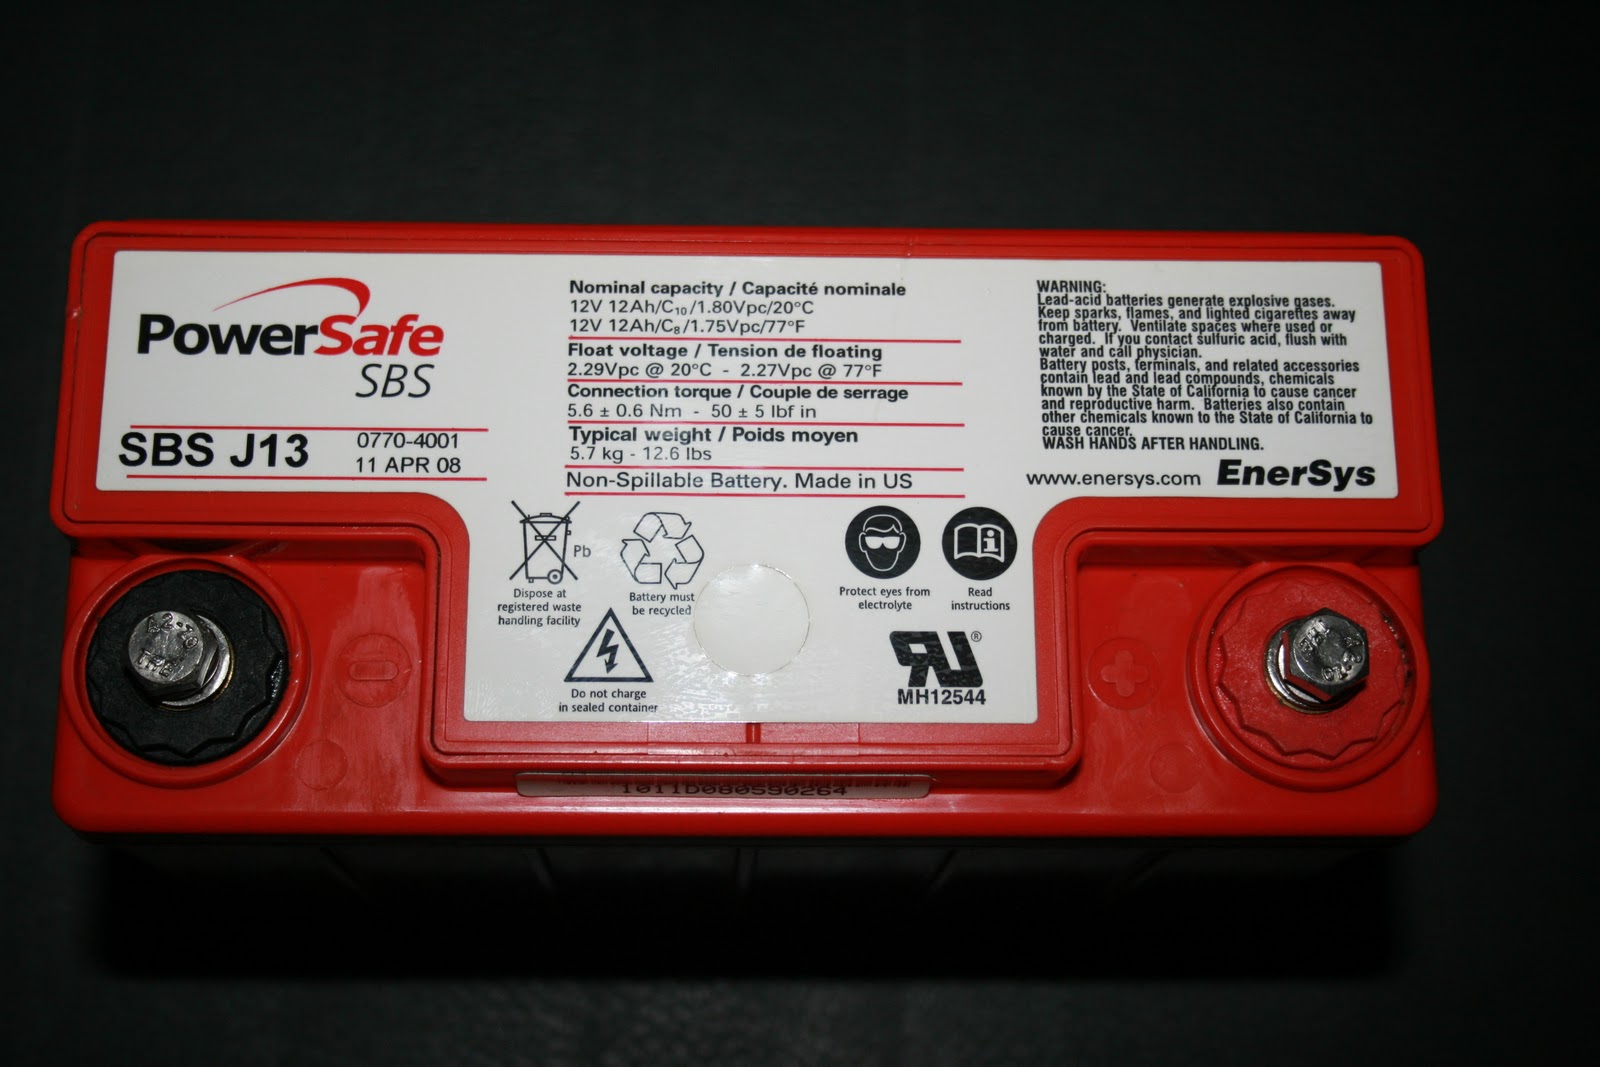 Power safe connect. Аккумуляторные батареи POWERSAFE 6 ve 140 made in France. Аккумулятор ENERSYS POWERSAFE 6v65 (6v / 90ah.